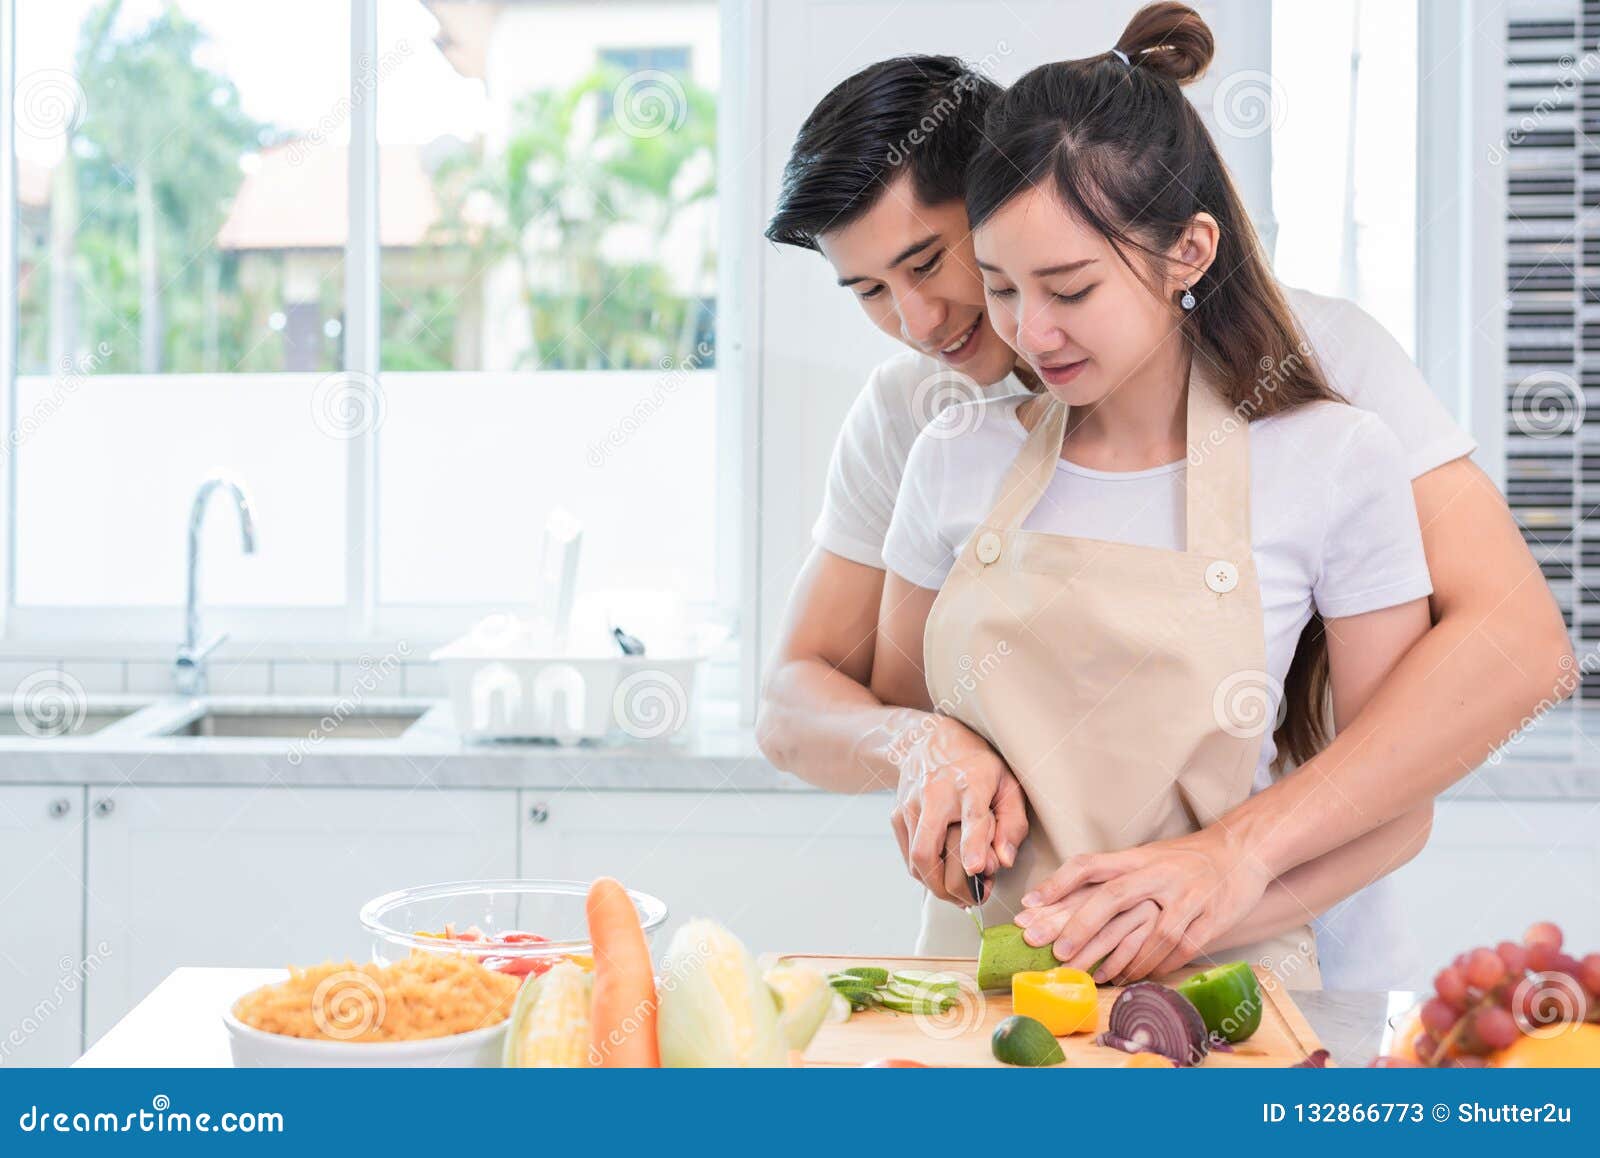 Asian Couples Cooking And Slicing Vegetable In Kitchen Together Stock Image Image Of Home